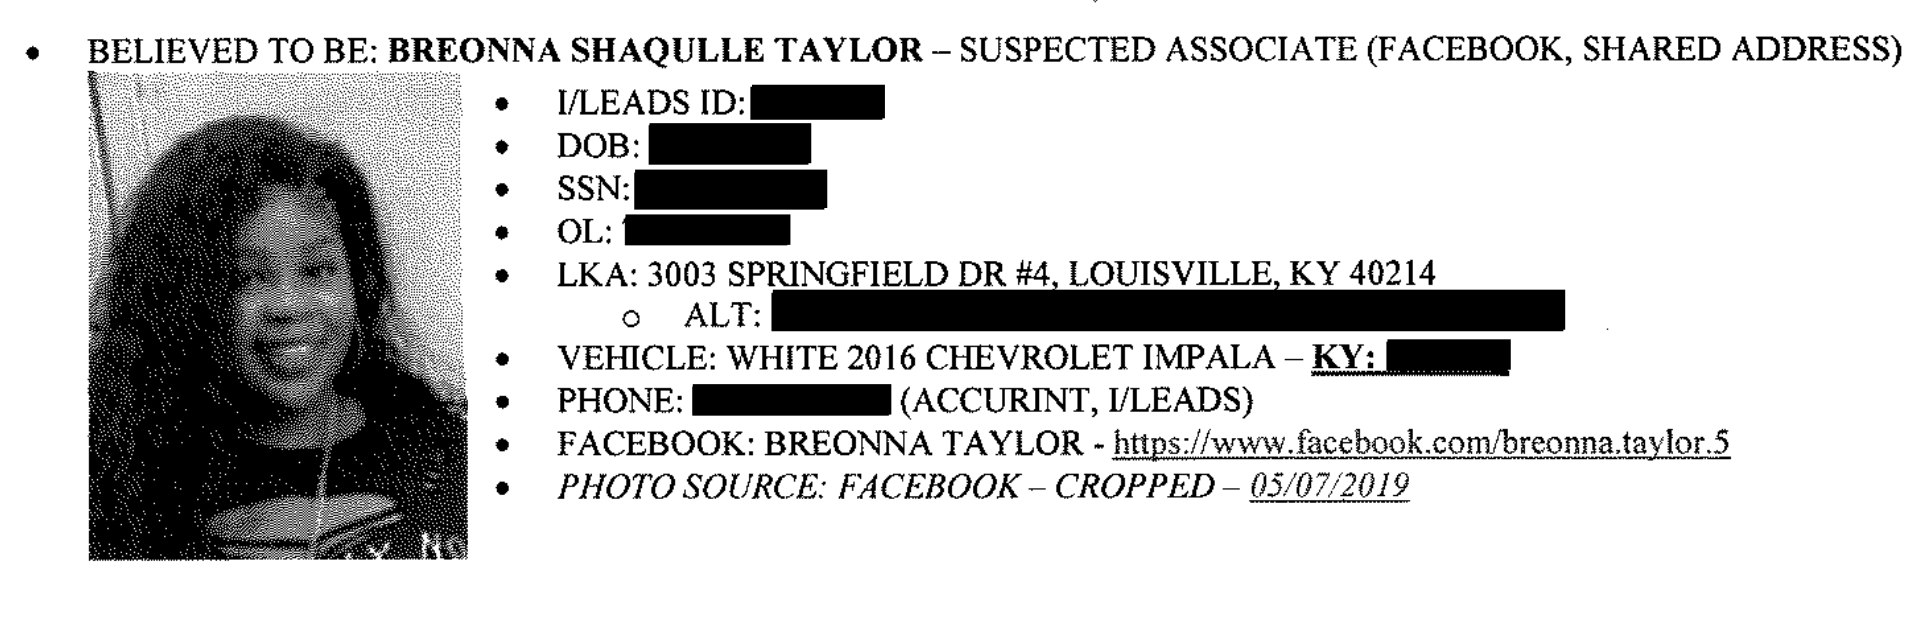 An intelligence file on Breonna Taylor&apos;s boyfriend Kenneth Walker, which was provided to LMPD Detectives before the raid on her home, listed Taylor as one of Walker&apos;s associates